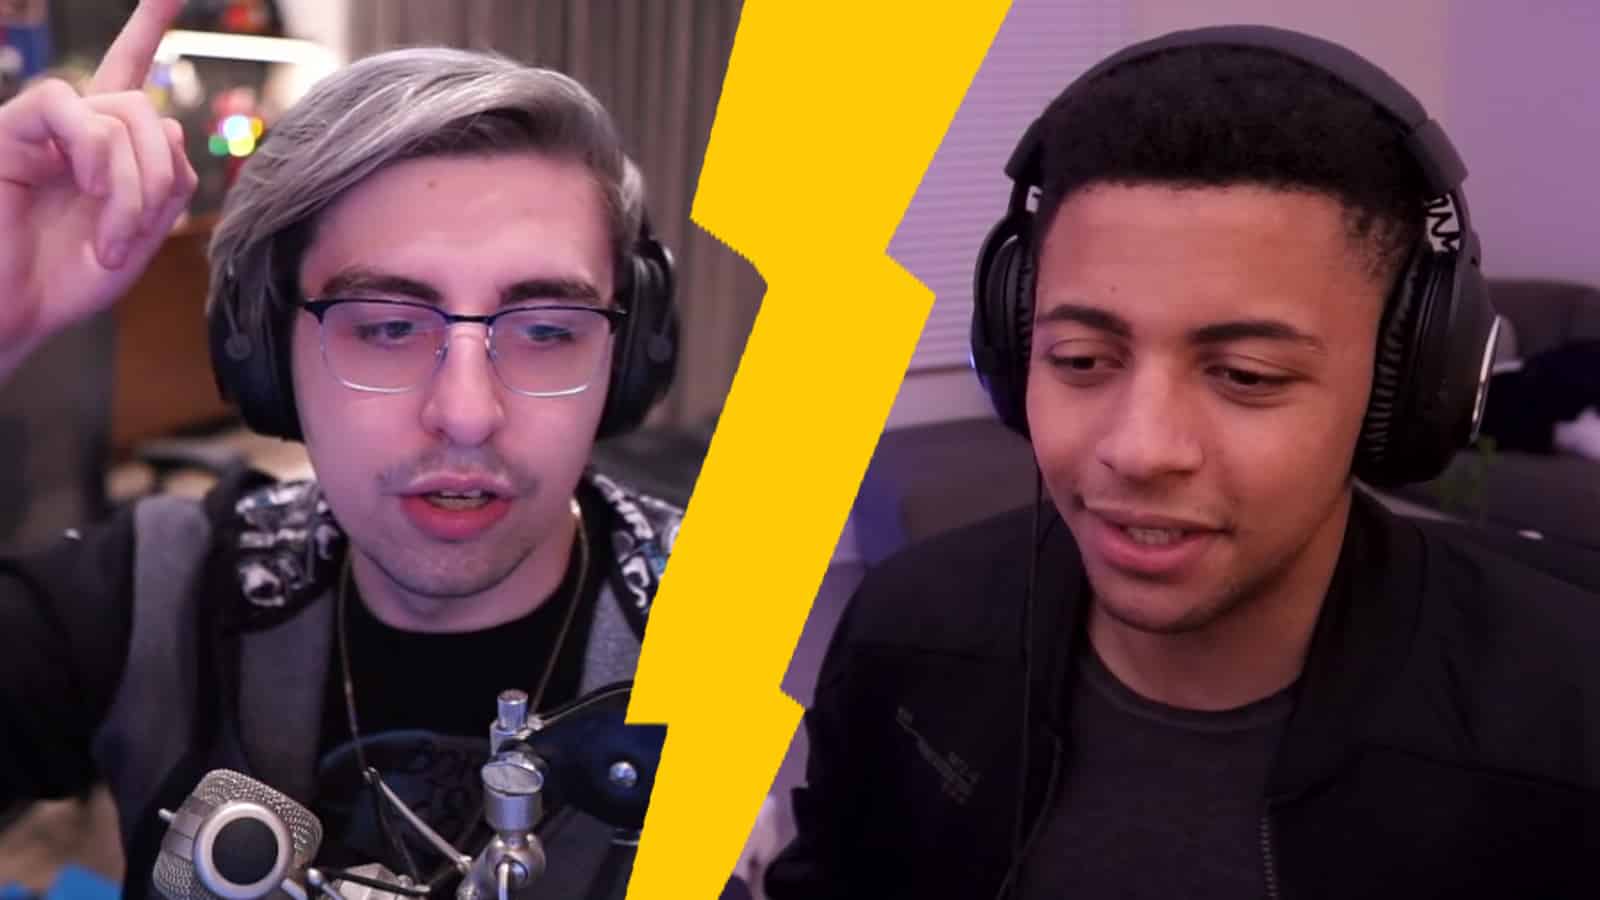 Myth hilariously challenges shroud to boxing match after Valorant trash talk